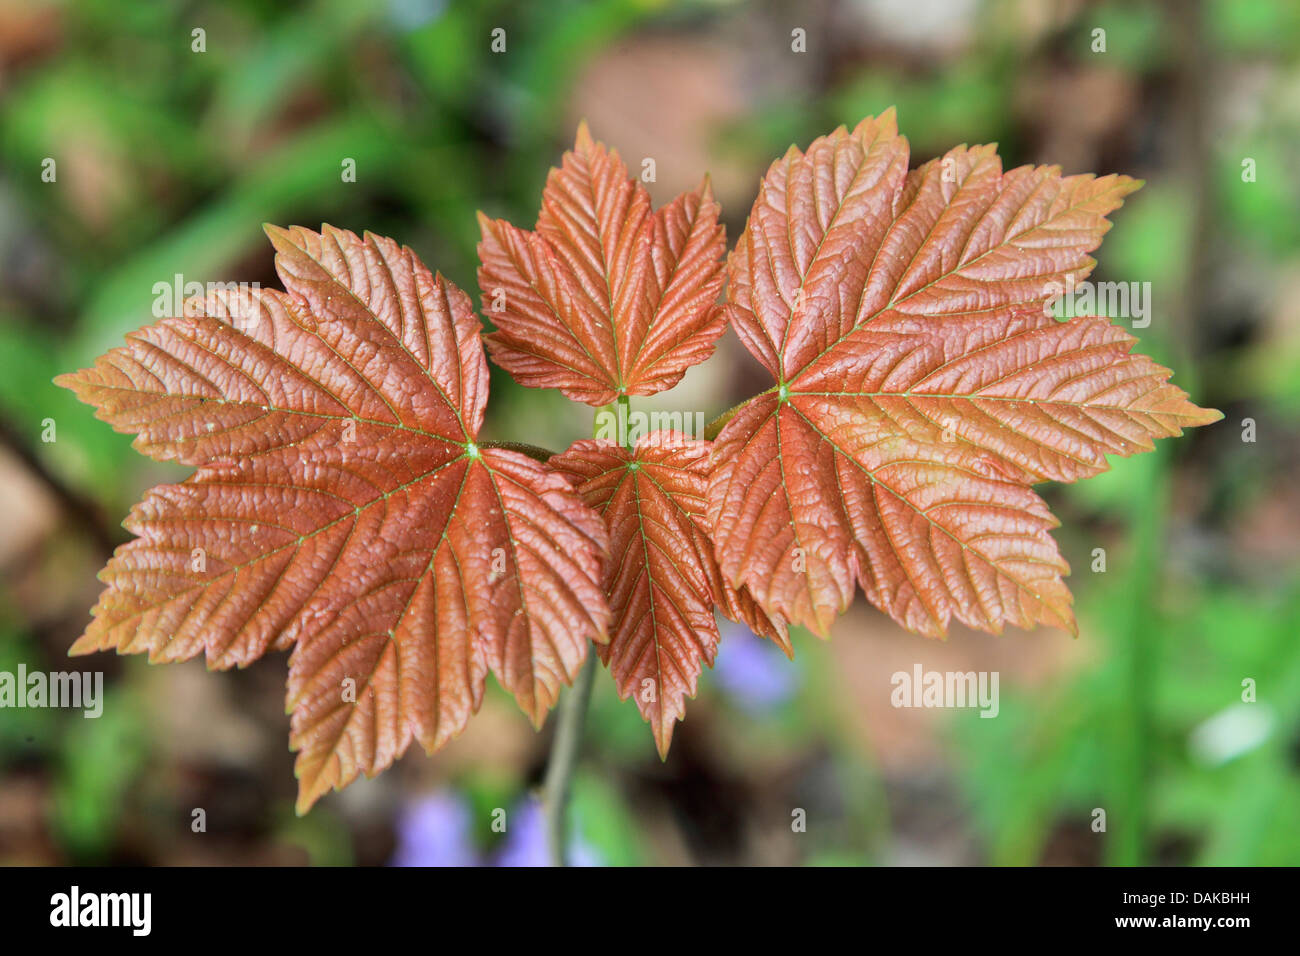 sycamore maple, great maple (Acer pseudoplatanus), leaf shooting in spring, Germany Stock Photo